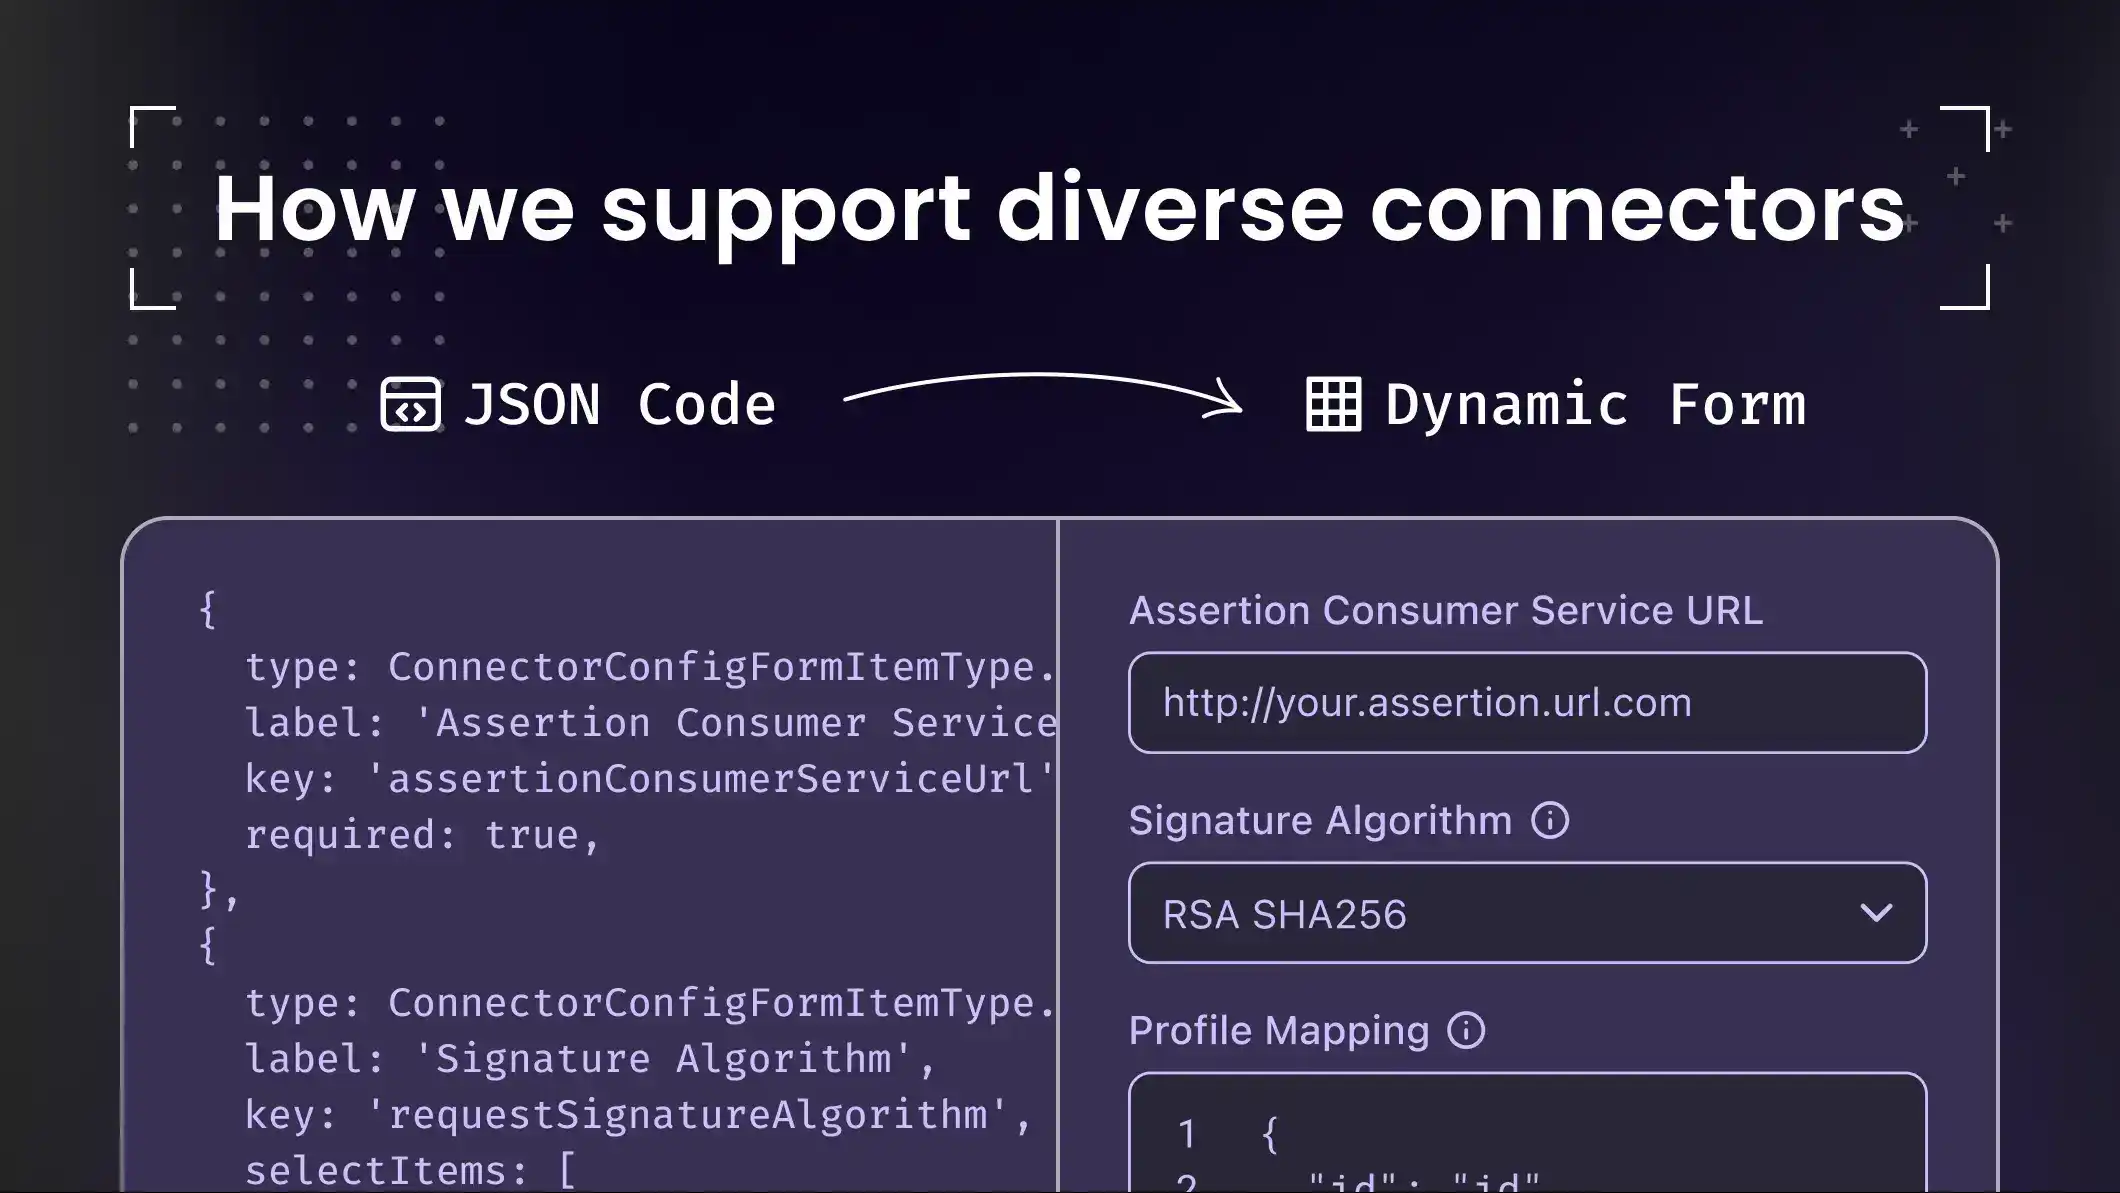 How we support an array of diverse connectors